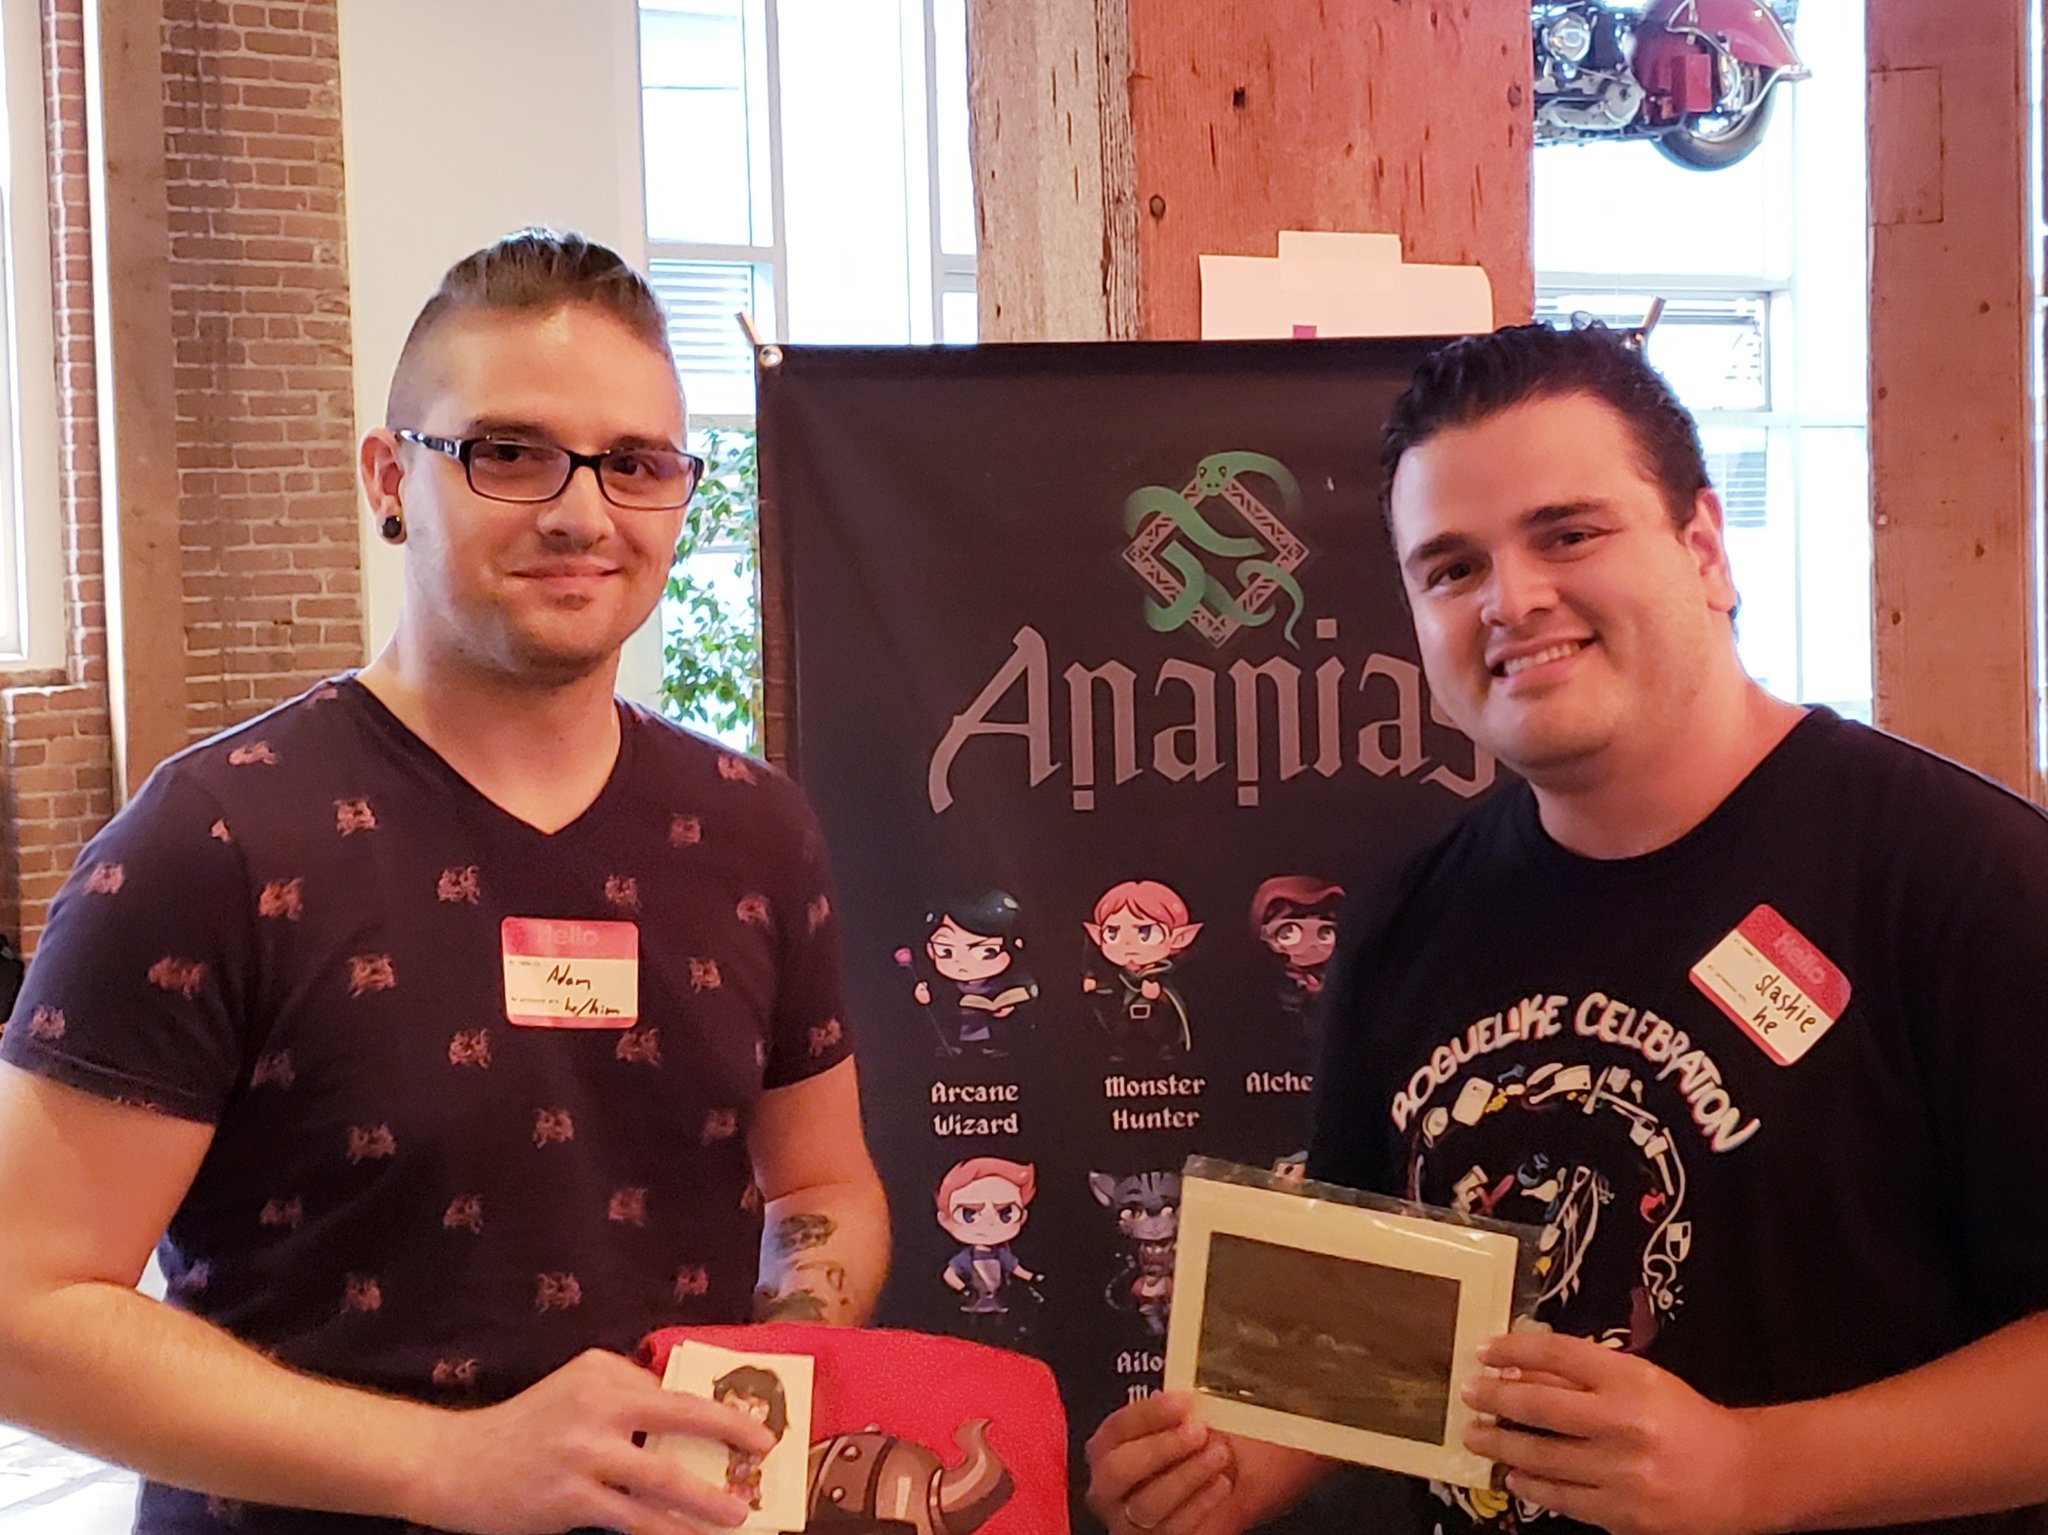 Adam Boyd receiving his prizes at roguelikecel